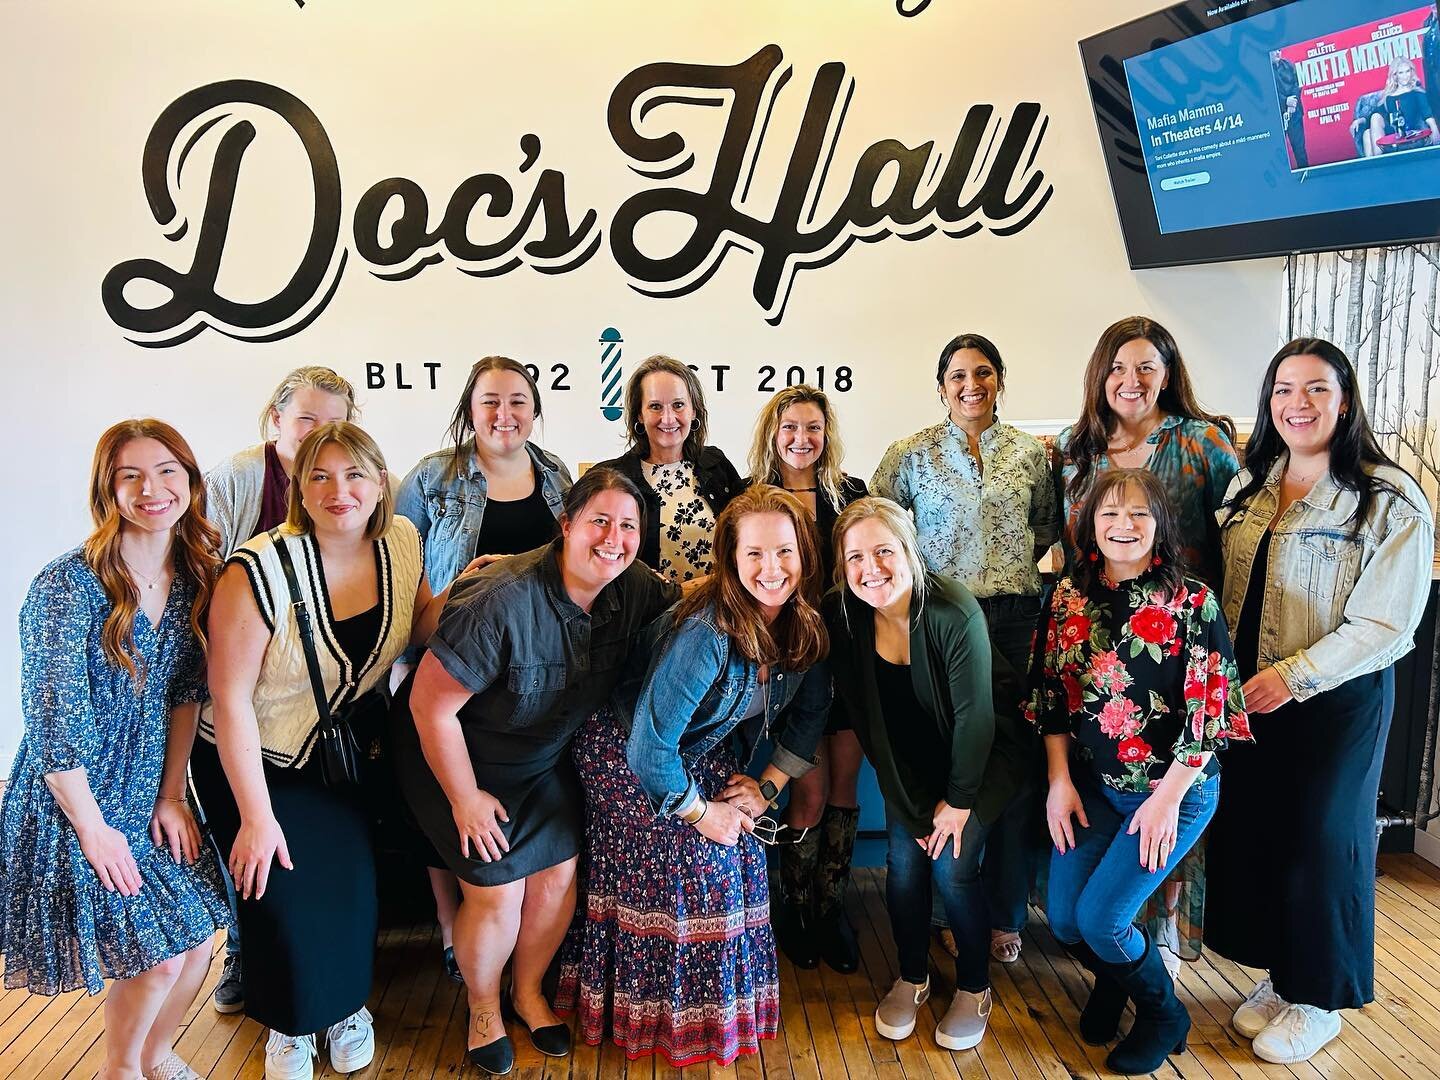 Throw back to another beautiful Tuesday, just a couple of weeks ago, when these amazing ladies came together to eat, chat and an enjoy a fabulous venue space! We were so thrilled to partner with MN Bride to welcome some of our local Event Planners to